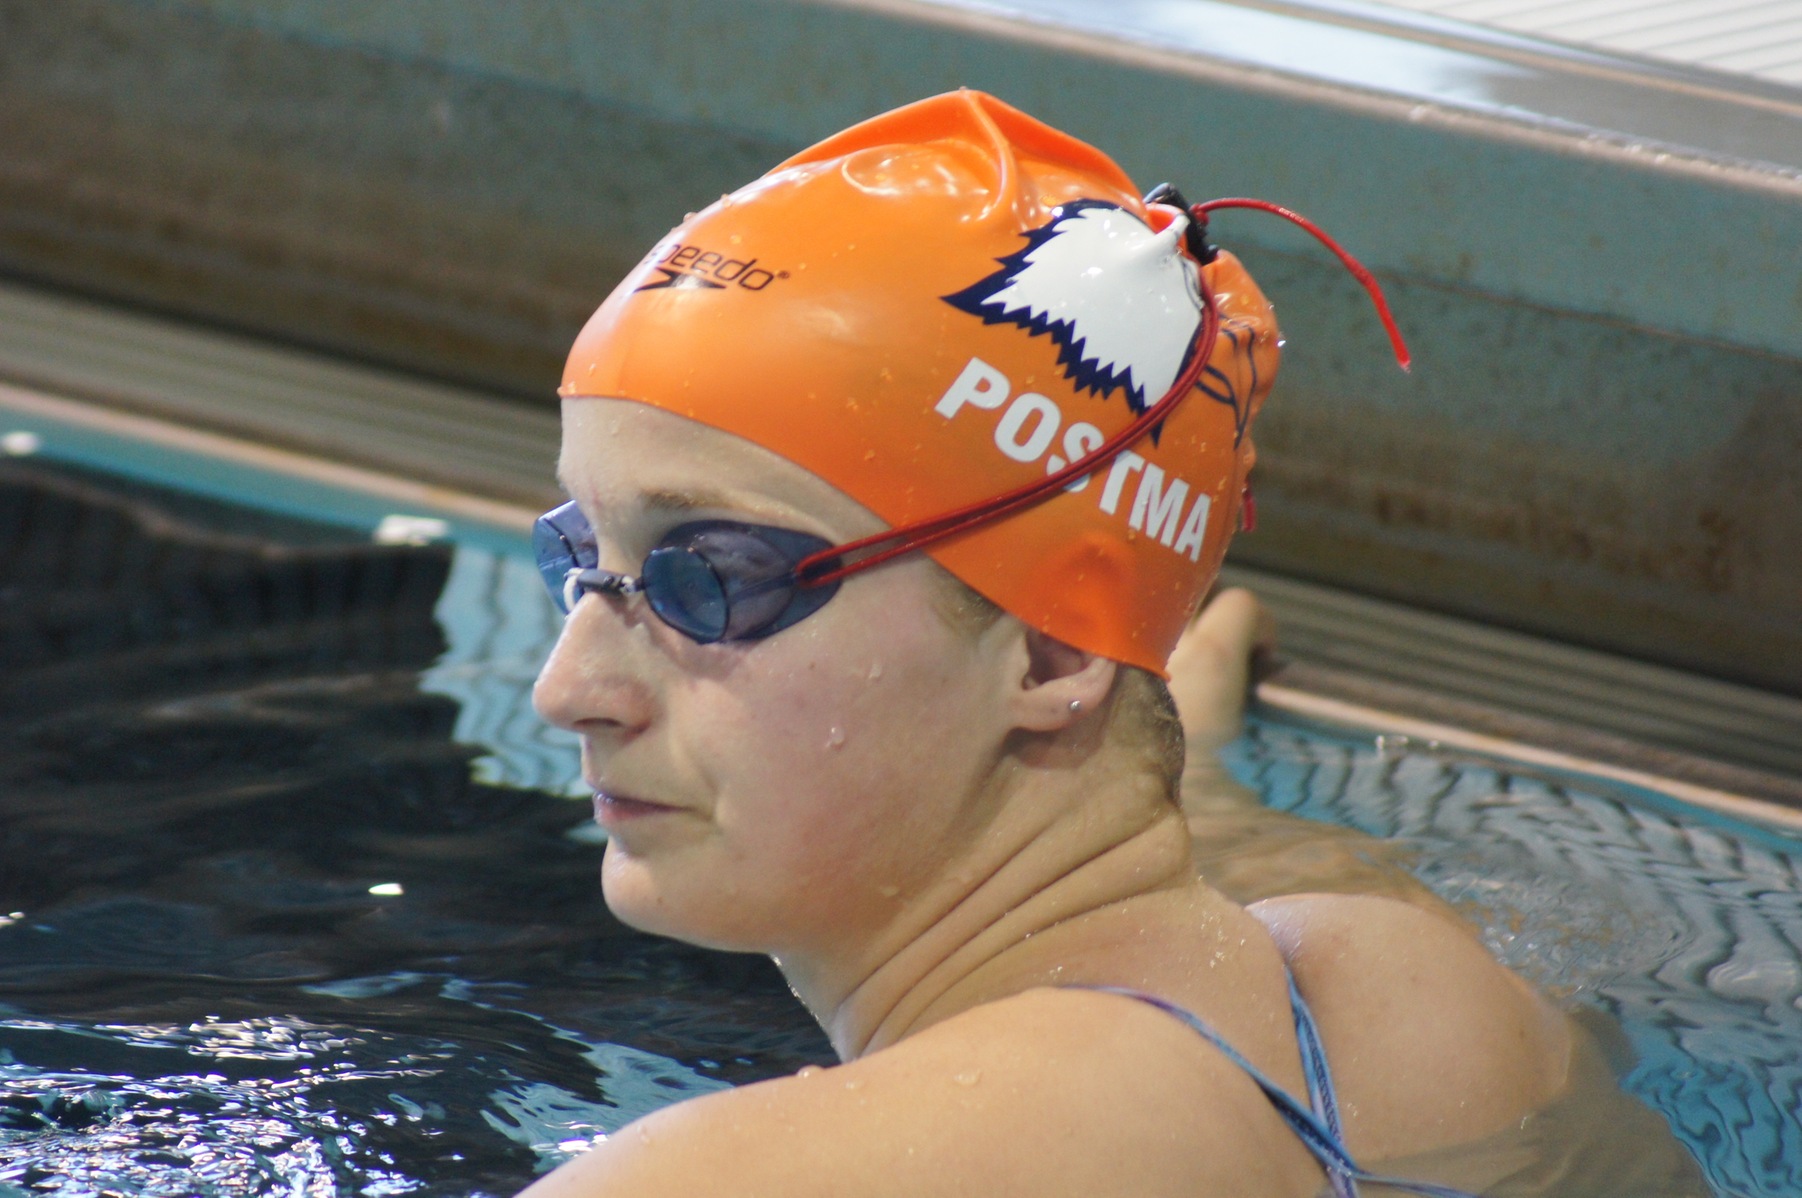 Postma swims in first-ever National Championship in Holland